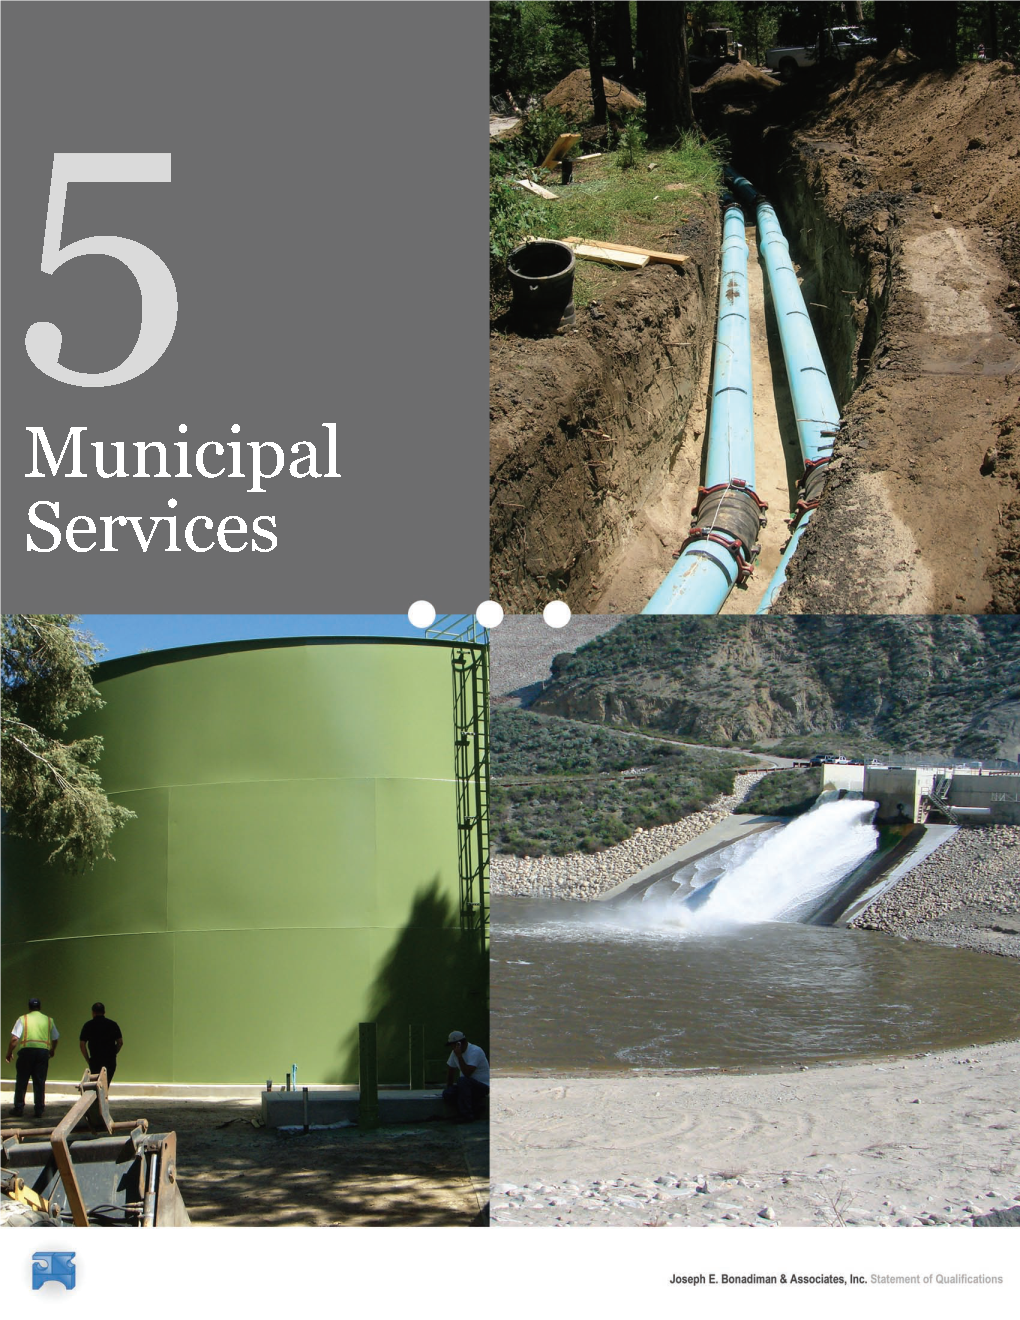 Municipal Services (Public Works) Projects Collectively Encompass A